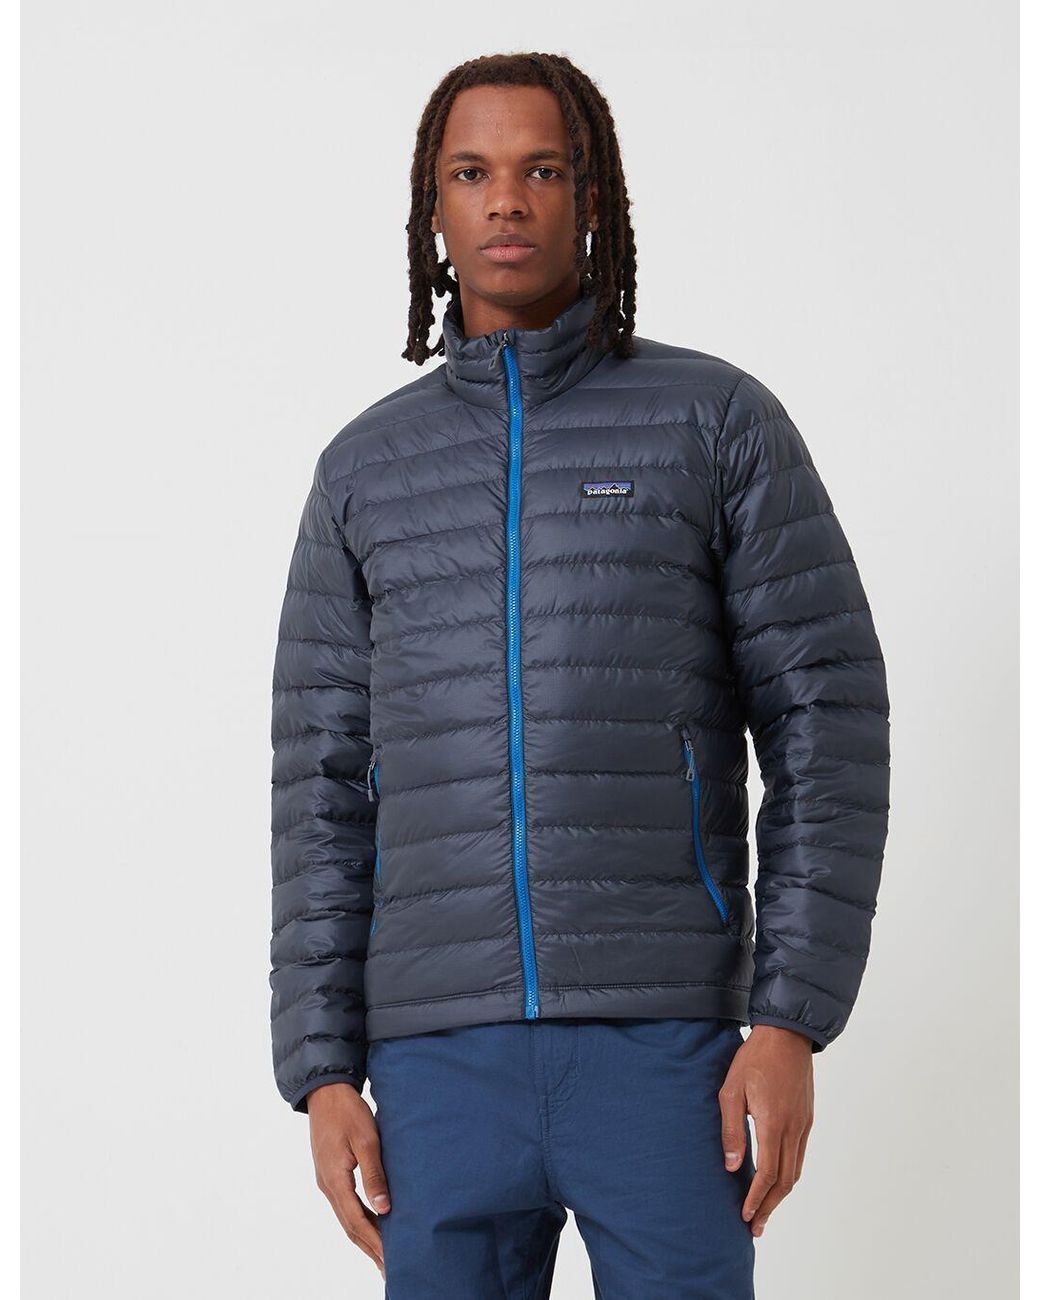 binding slikken overschrijving Patagonia Down Sweater Insulated Jacket - Smolder /andes in Blue for Men |  Lyst